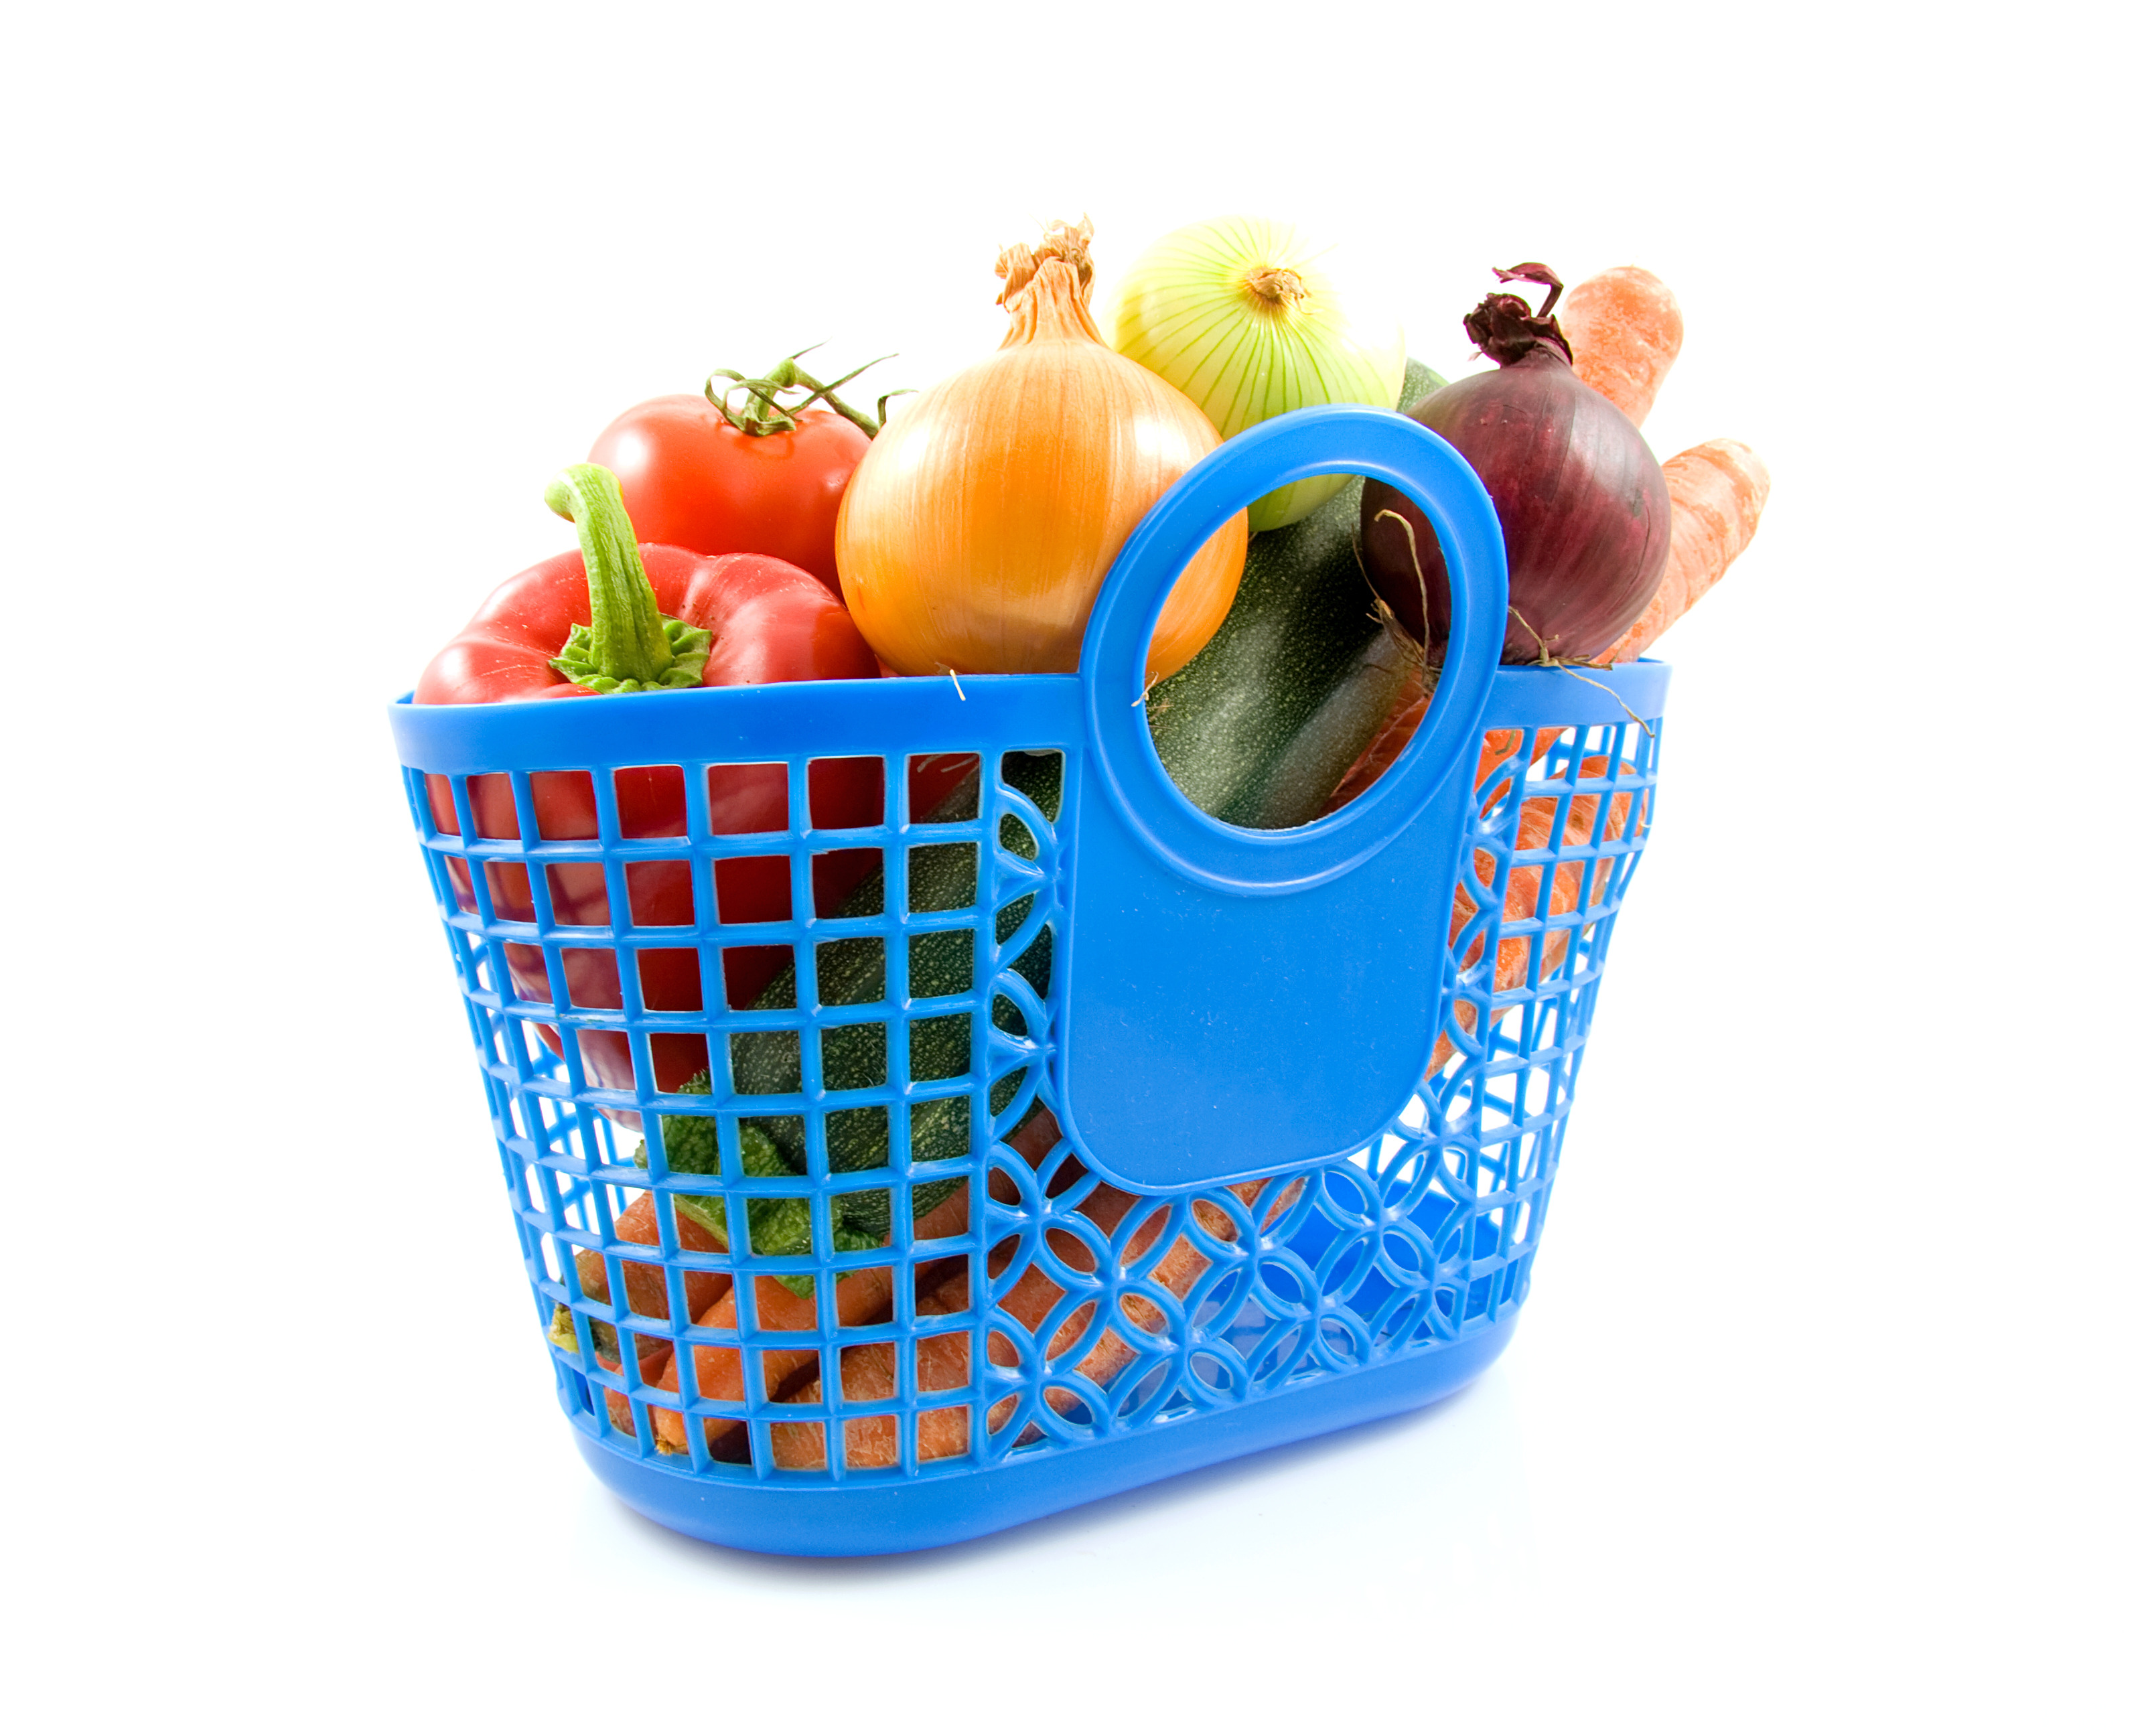 Blue plastic shopping bag with grocery